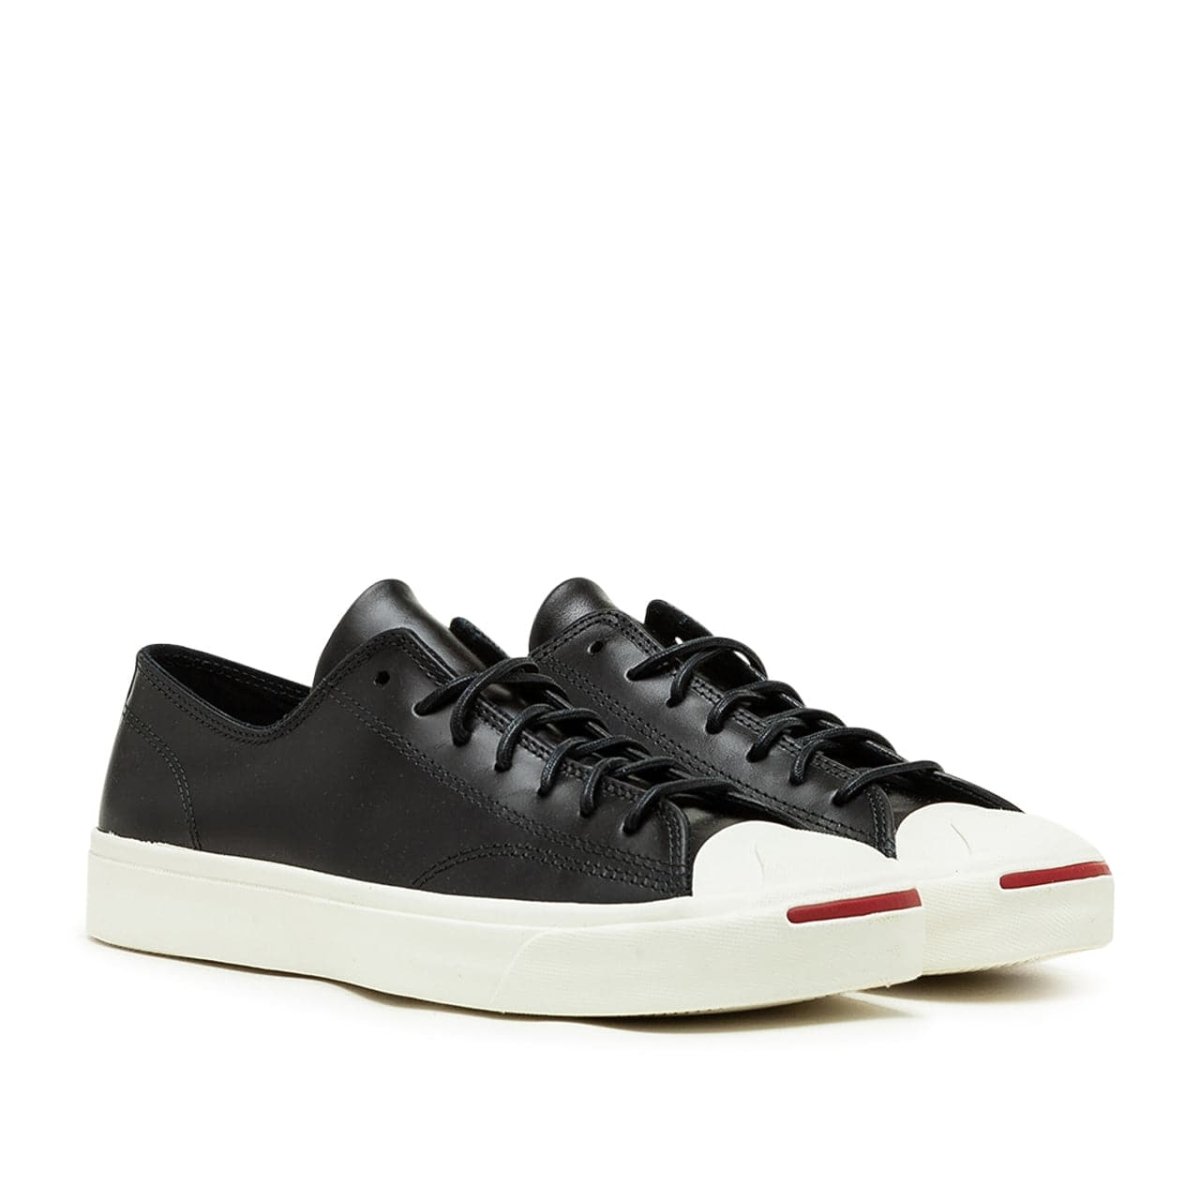 Converse Jack Purcell Leather OX (Schwarz / Weiß)  - Allike Store